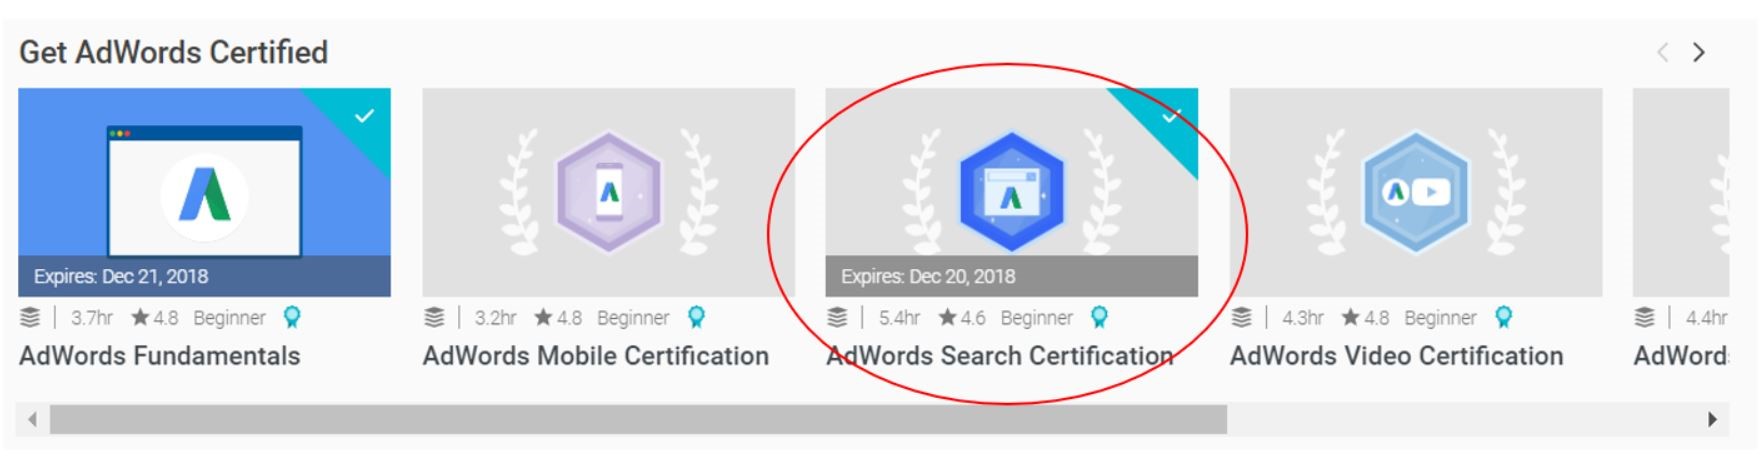 Adwords Search Certification